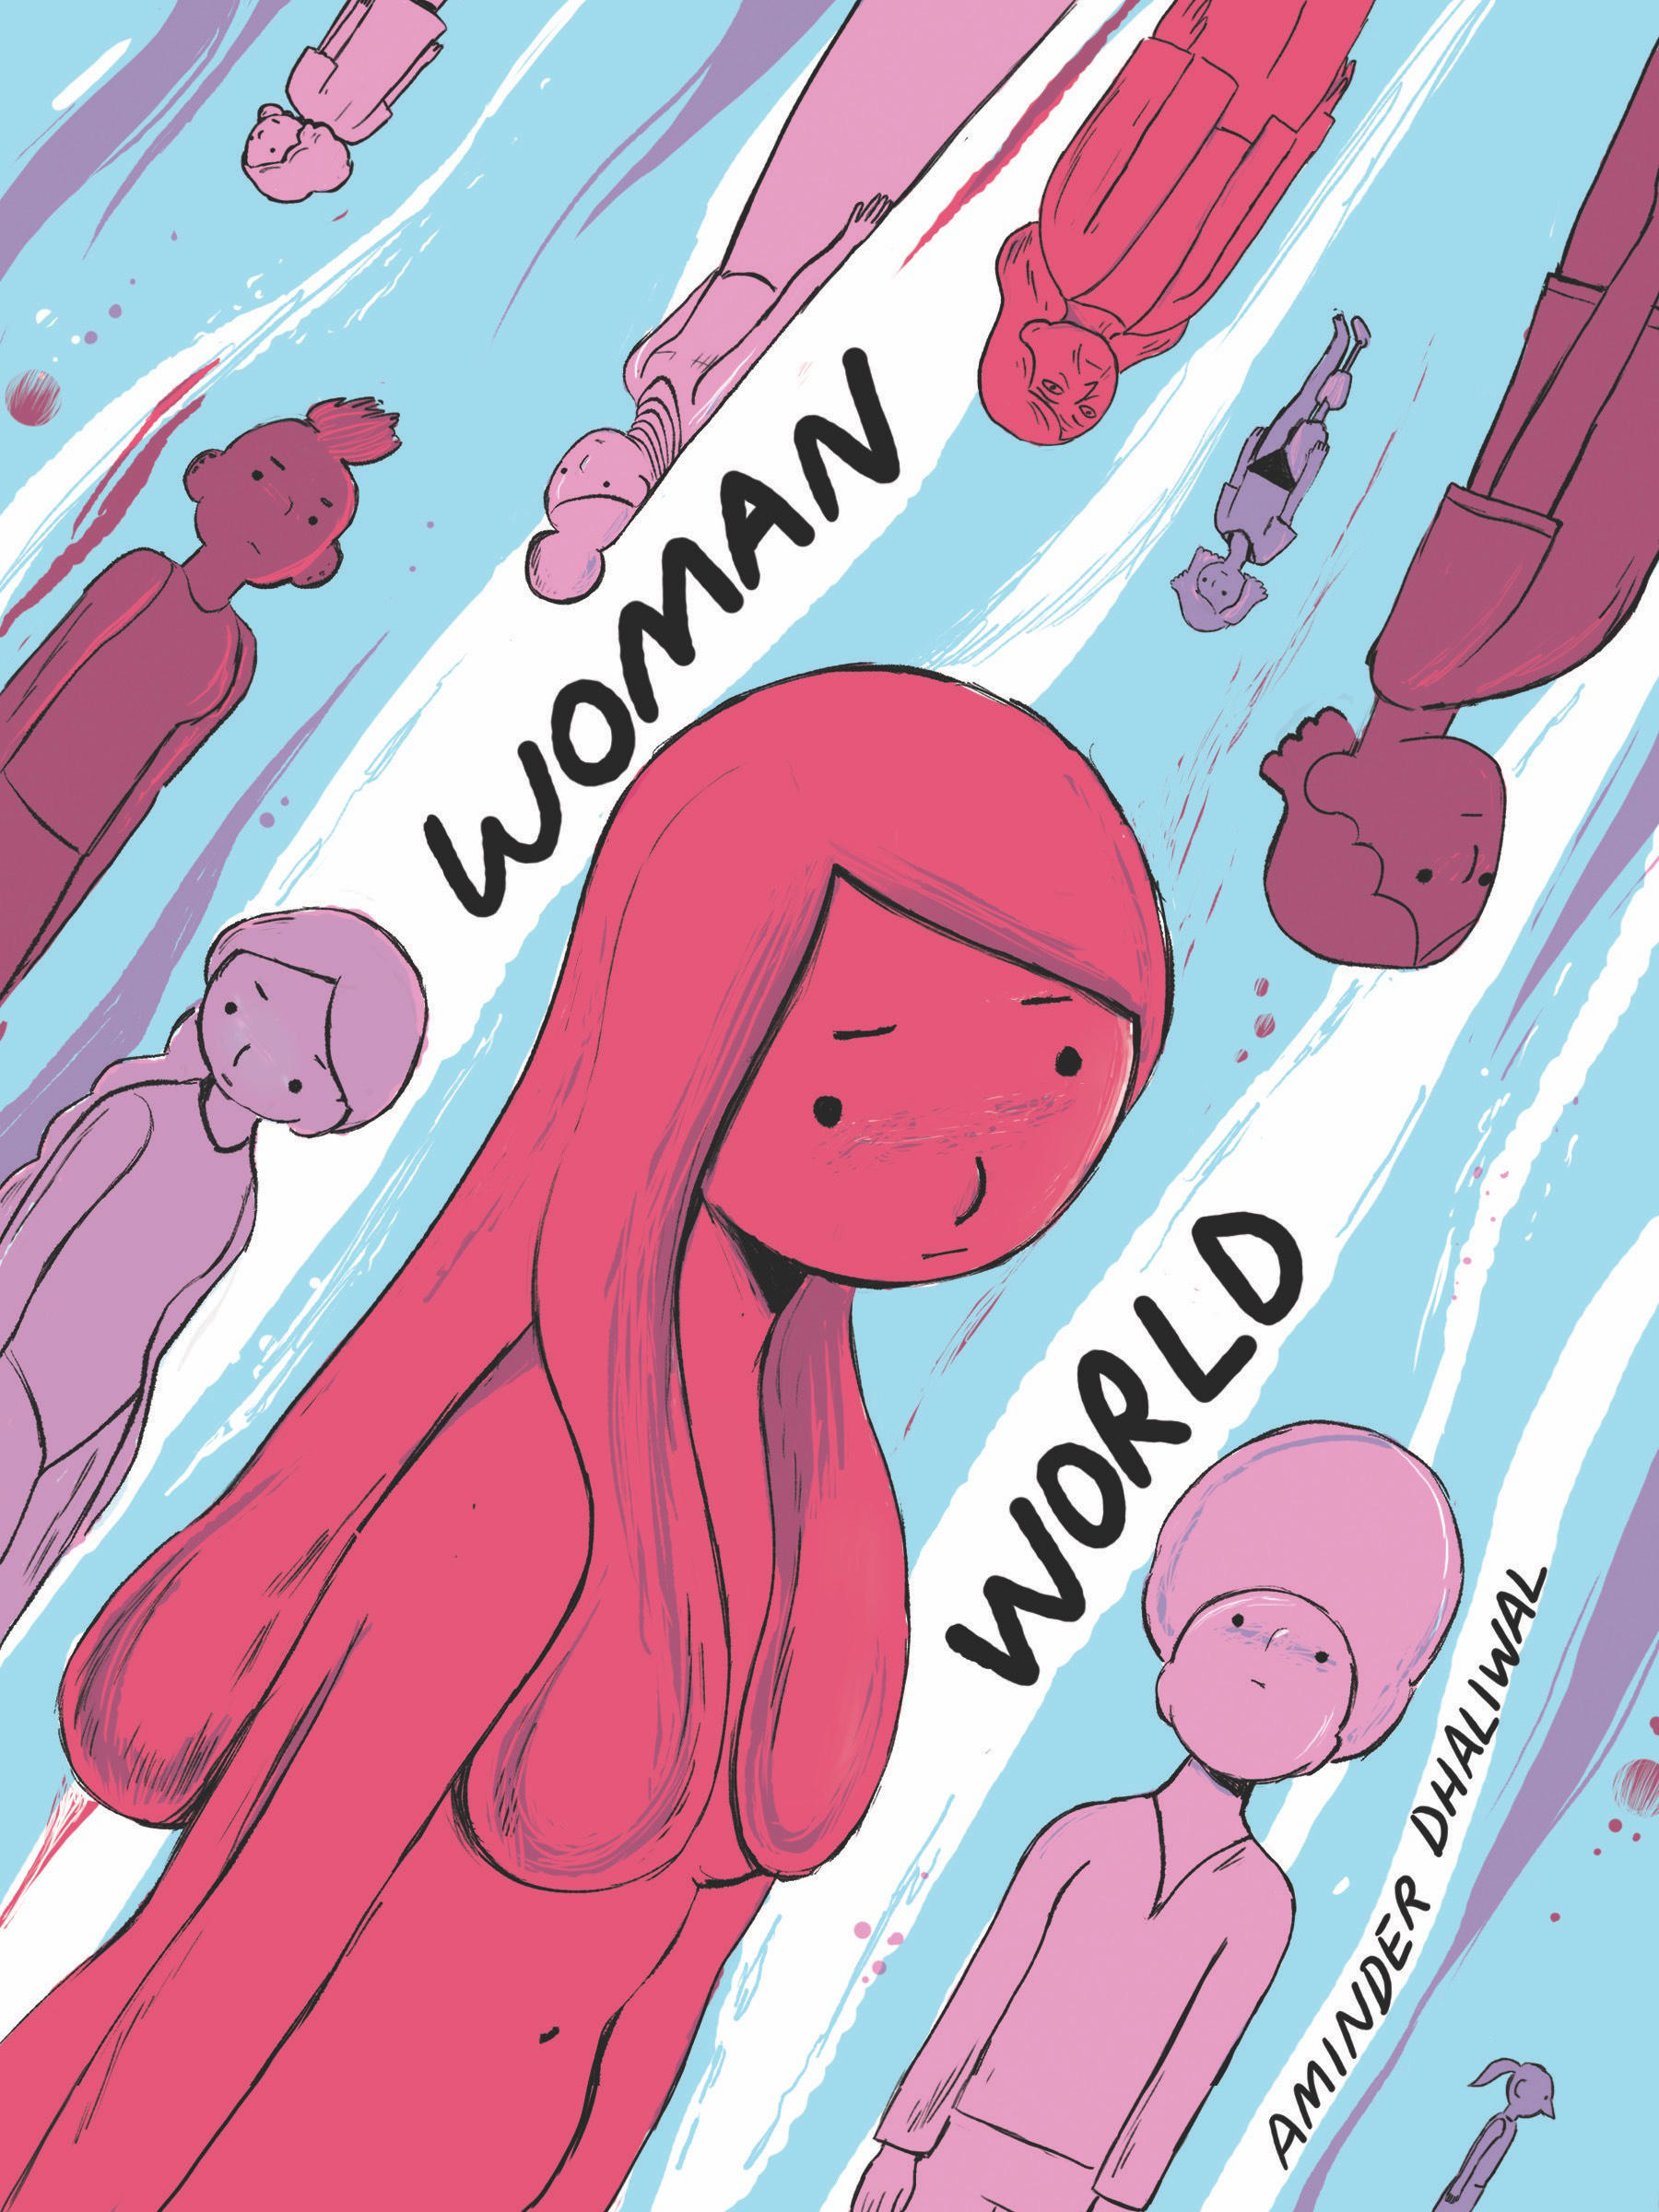 This Winter, Woman World Delivers A Hilarious Vision Of An Earth With No Men